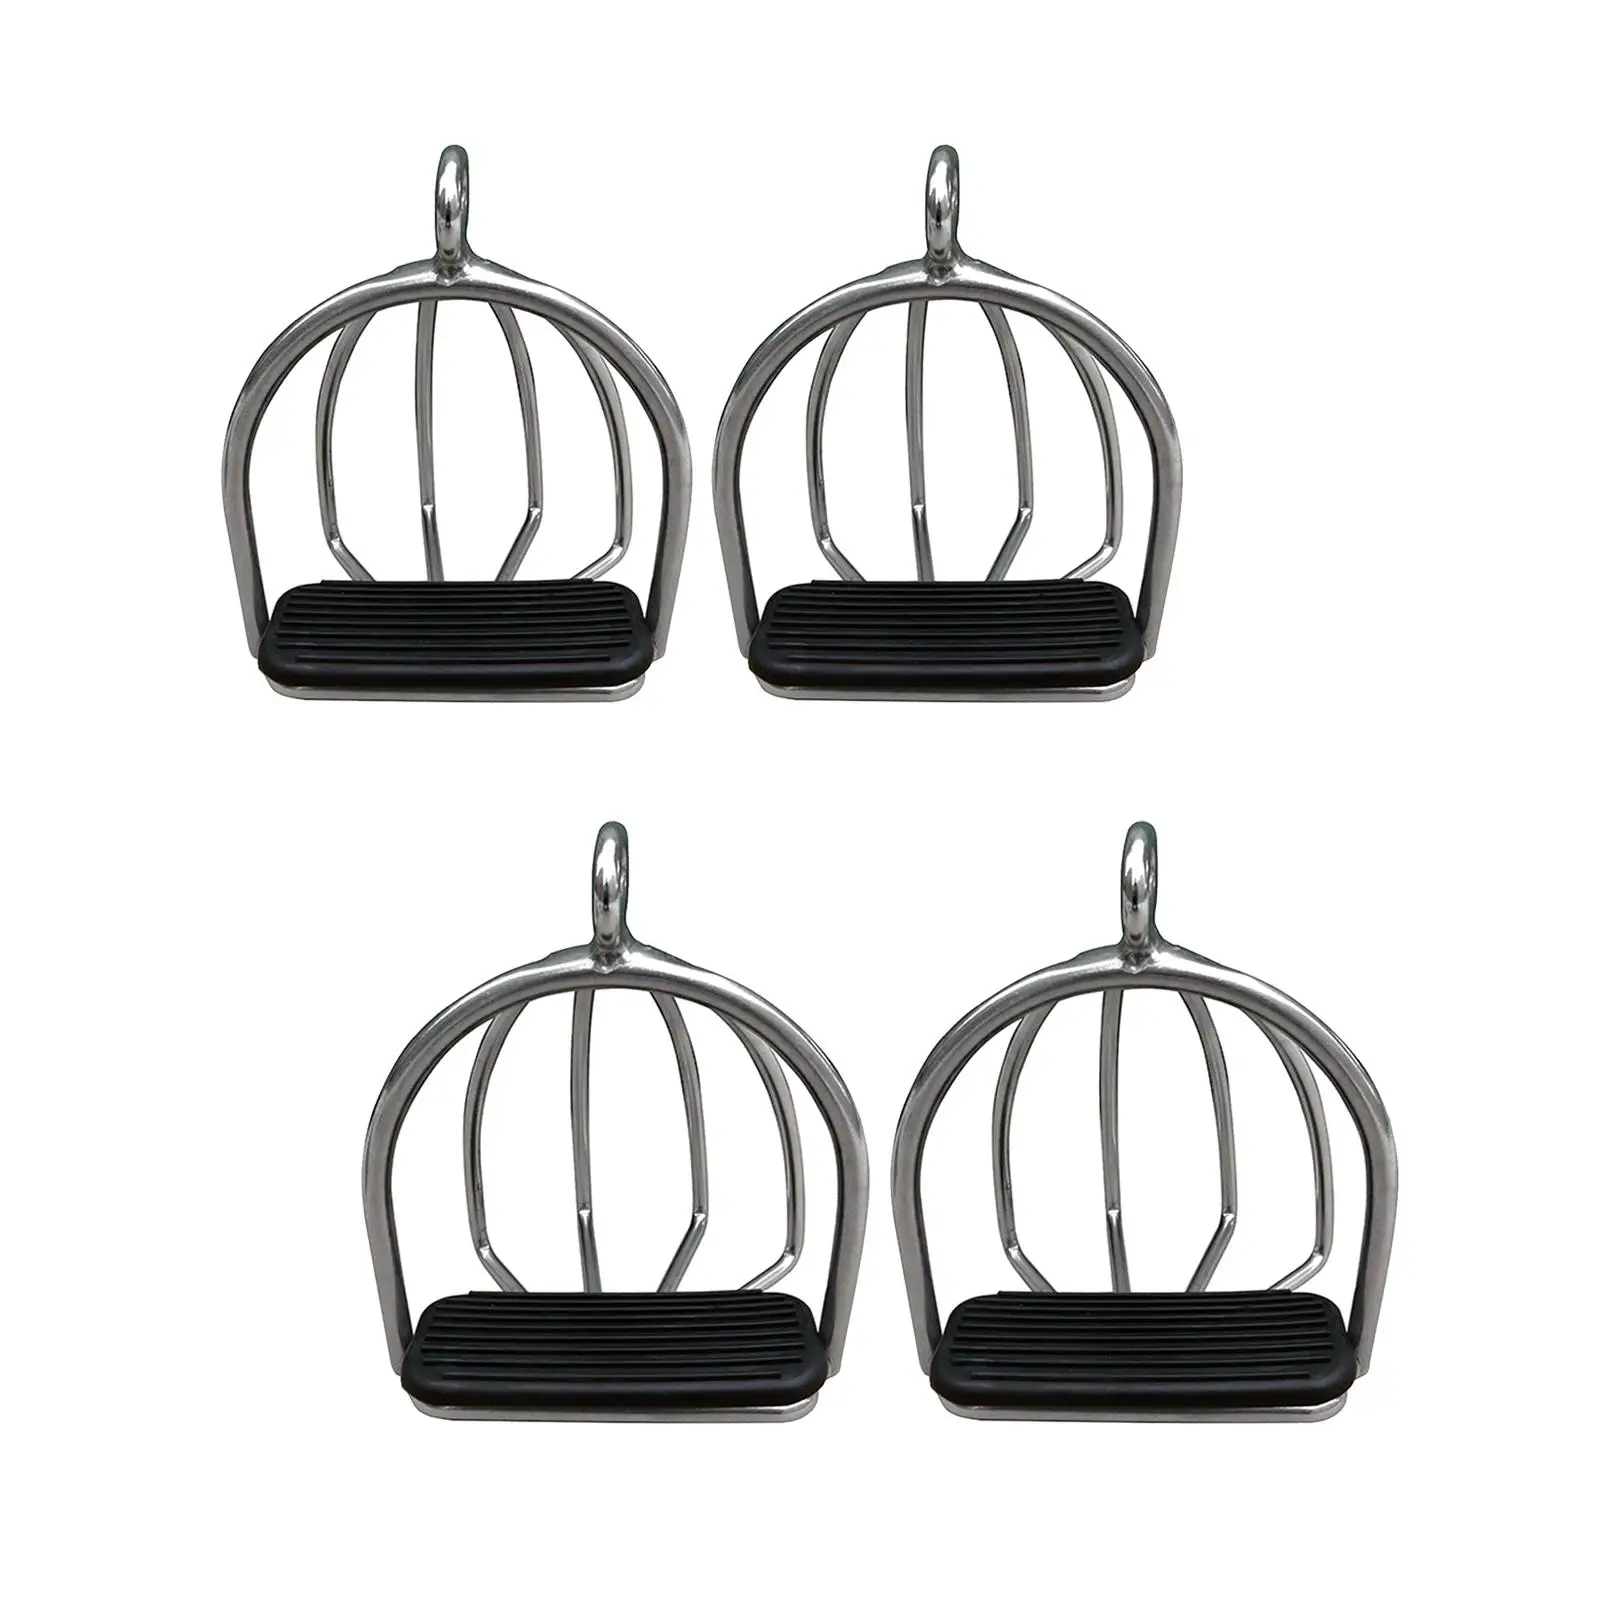 2x Cage Horse Riding Stirrups Steel Non Slip Equestrian Sports Tool for Safety Horse Riding Outdoor Sports Kids Supplies Adults